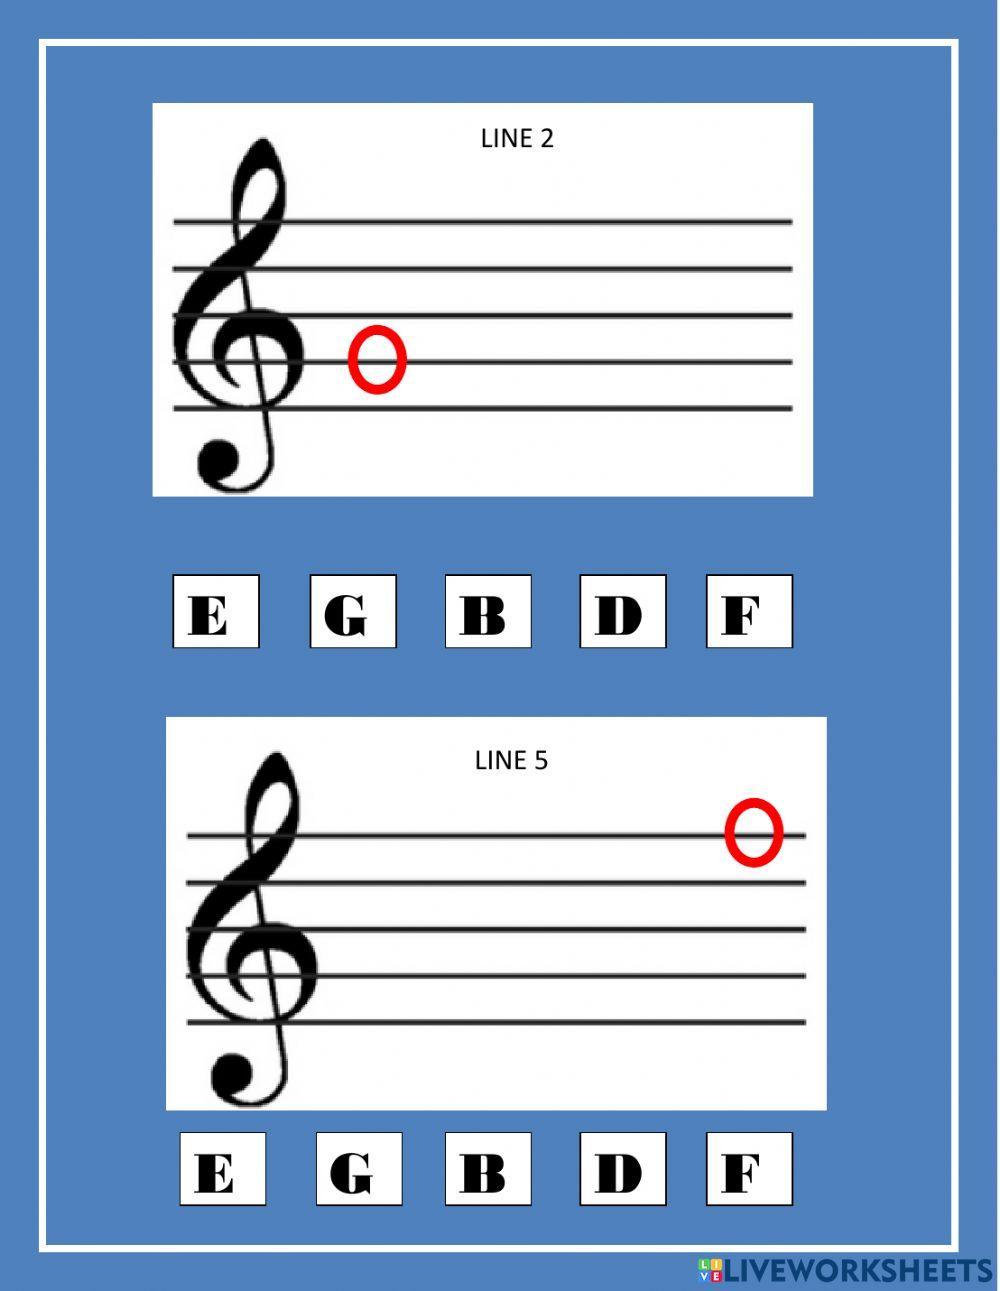 Staff Letters (Treble Clef)